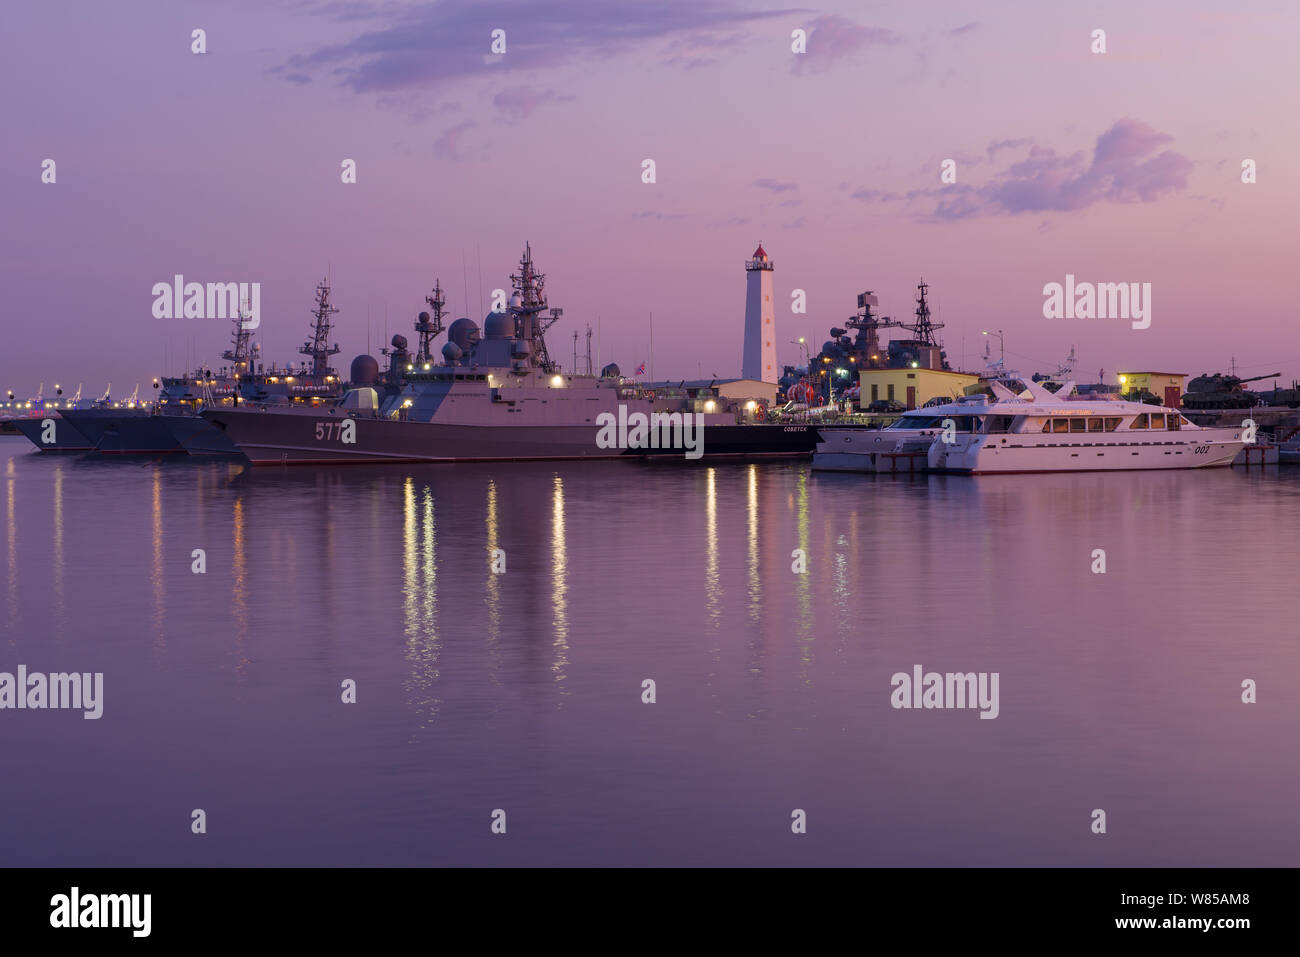 SAINT-PETERSBURG, RUSSIA - JULY 27, 2019: July twilight in the Middle Harbor. Kronstadt Stock Photo